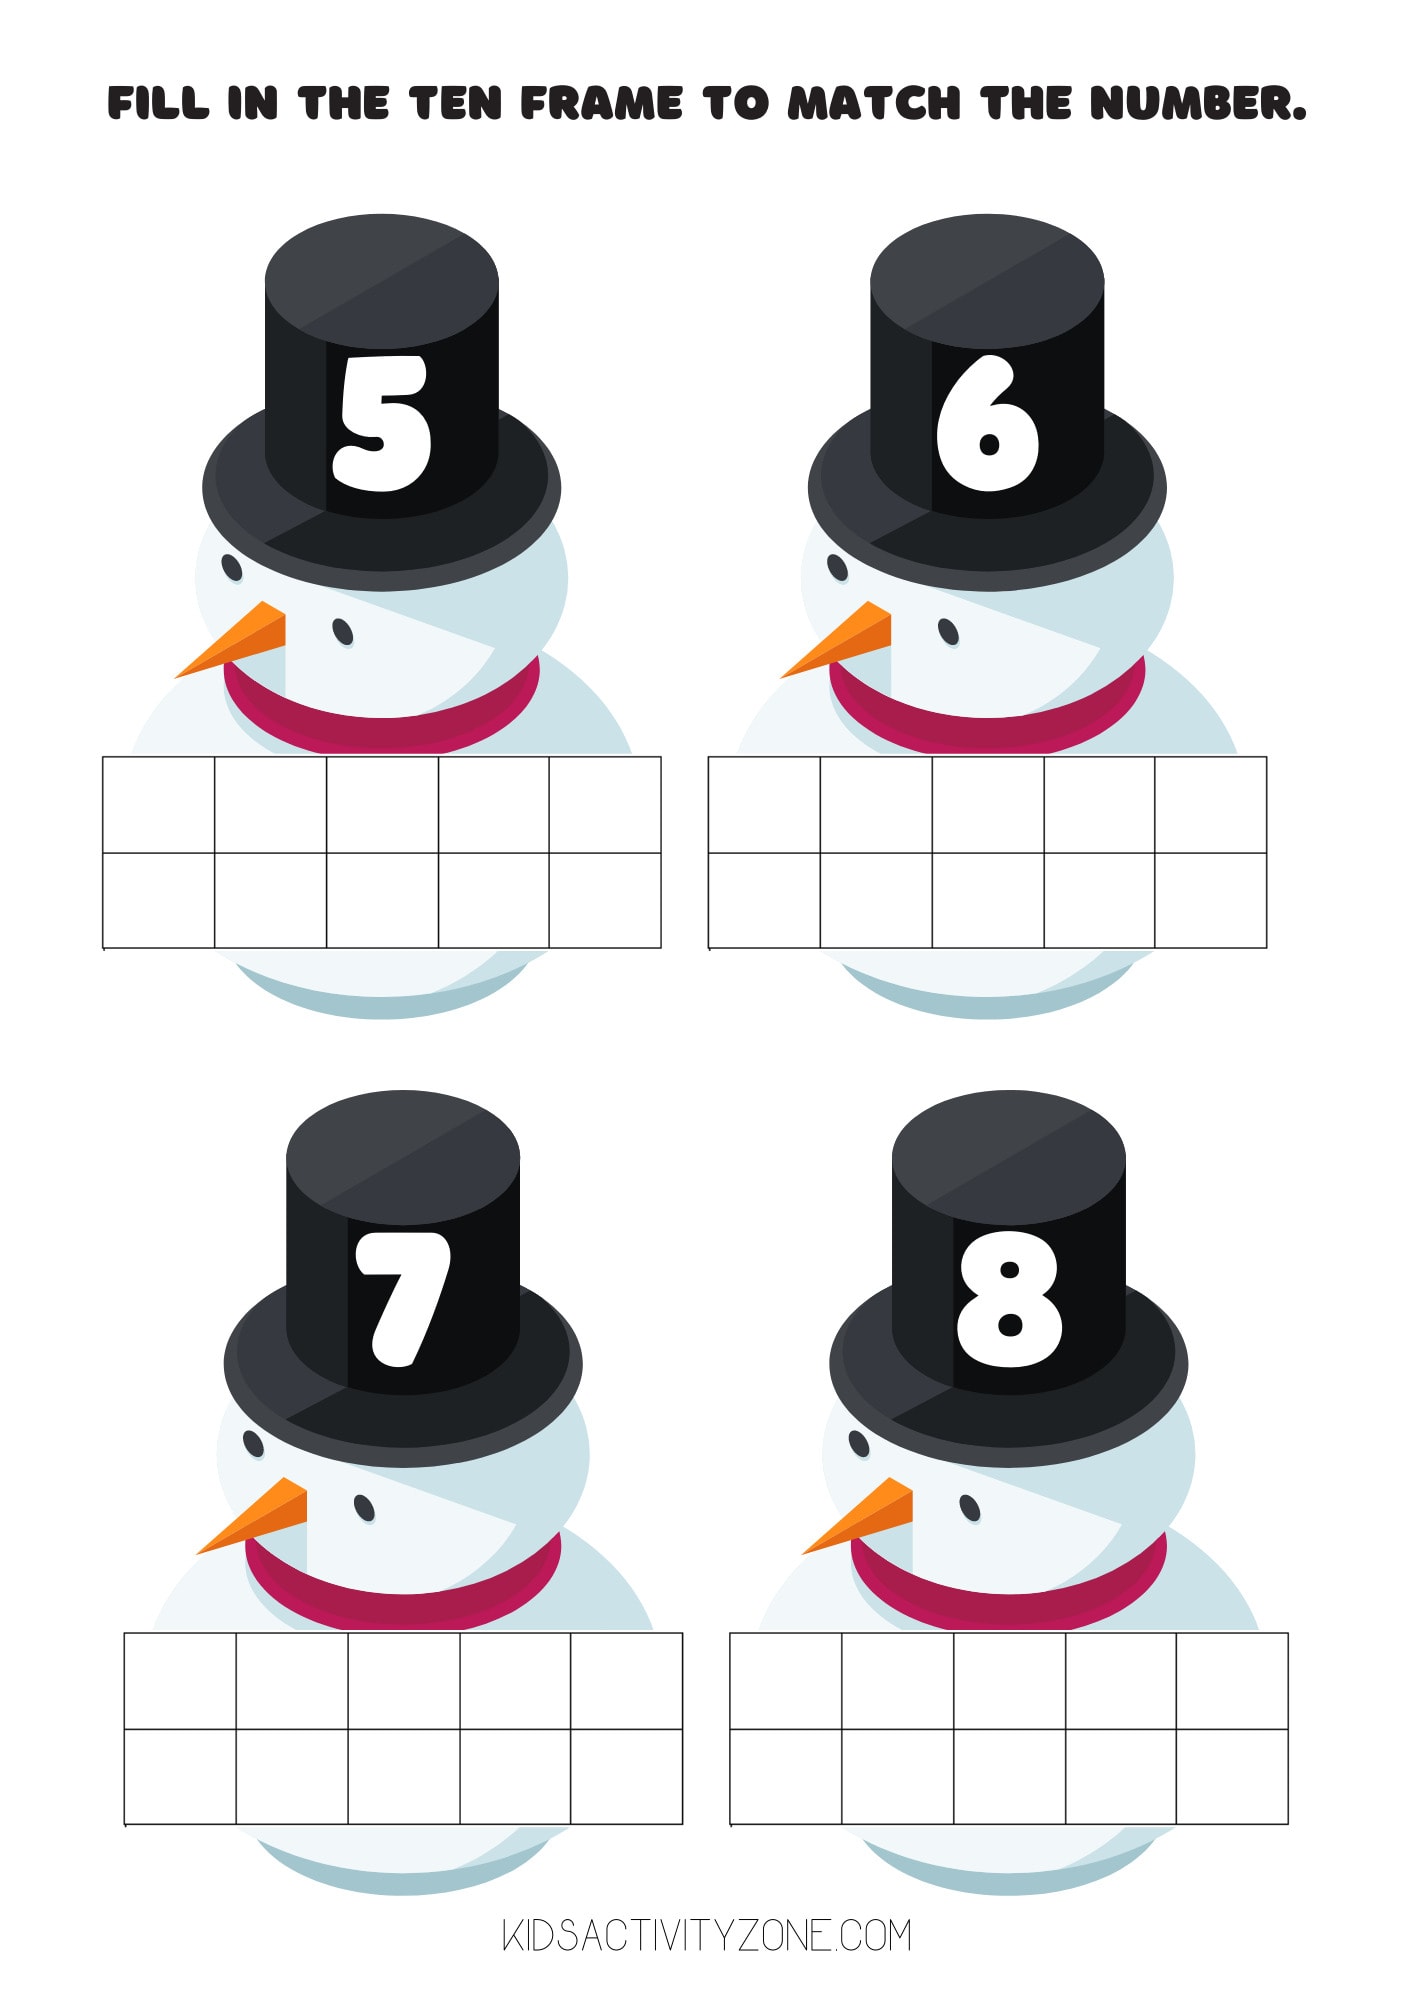 Snowman Fill in Frame 5-8 Printable